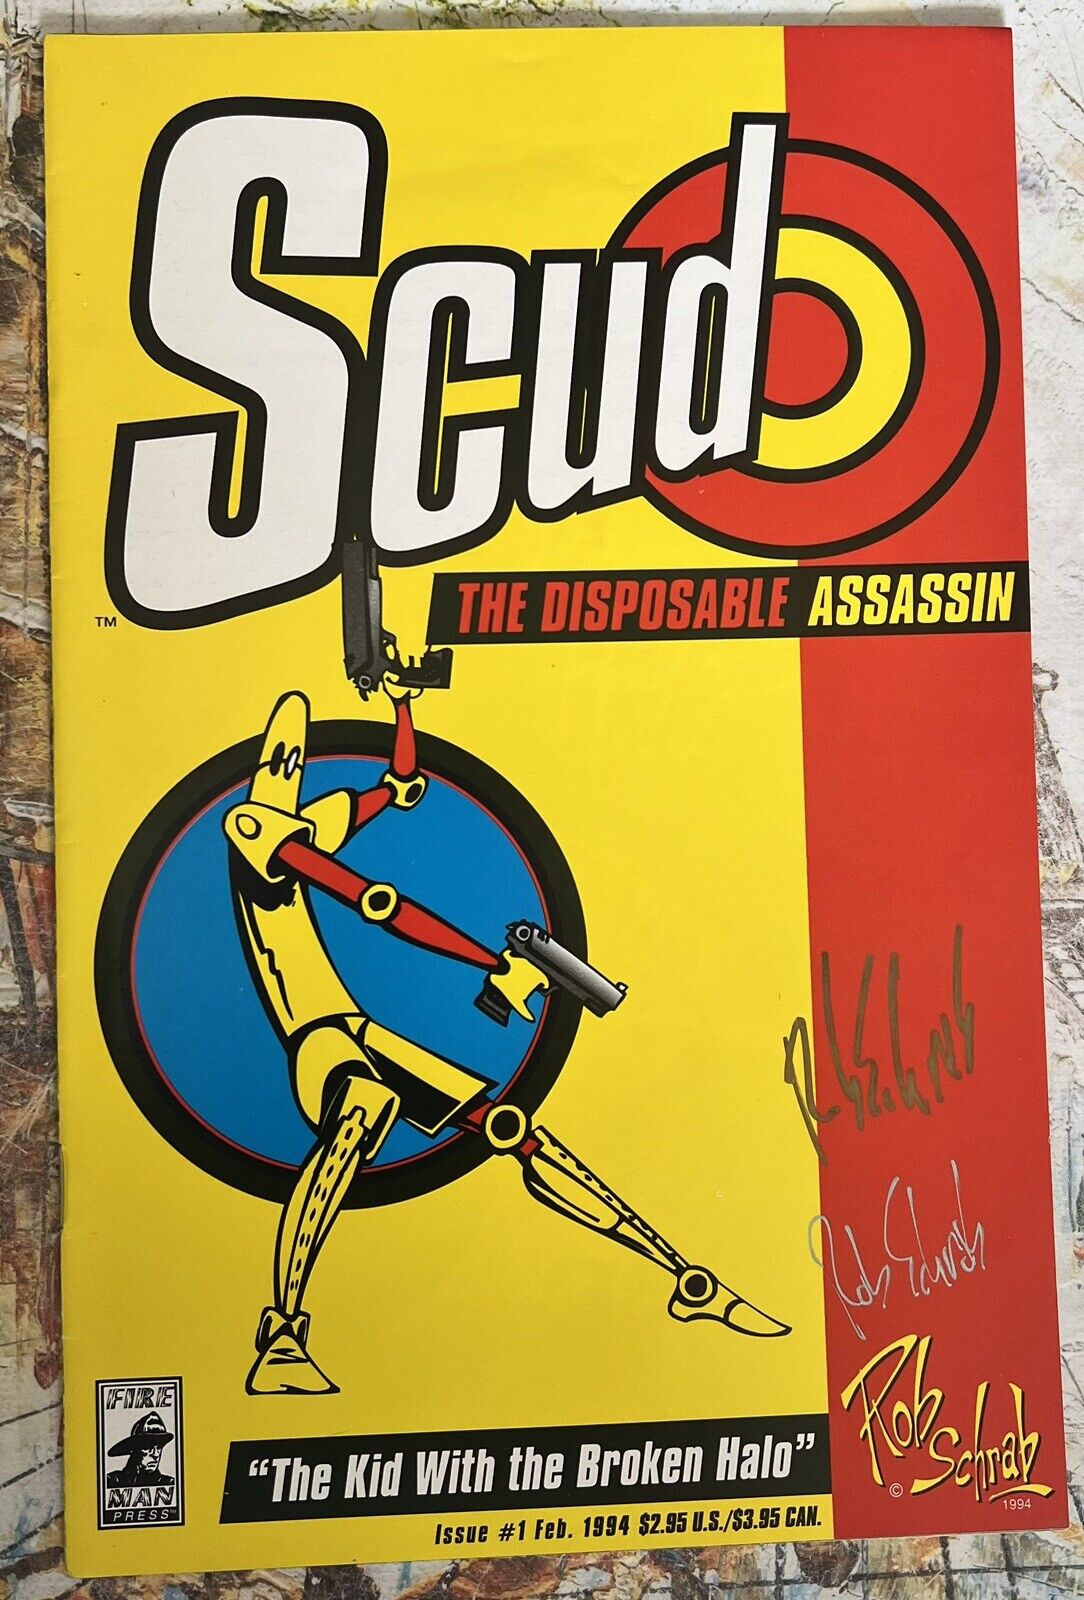 Scud the Disposable Assassin #1 Signed By Rob Schrab -Fireman 1994 1st App RARE